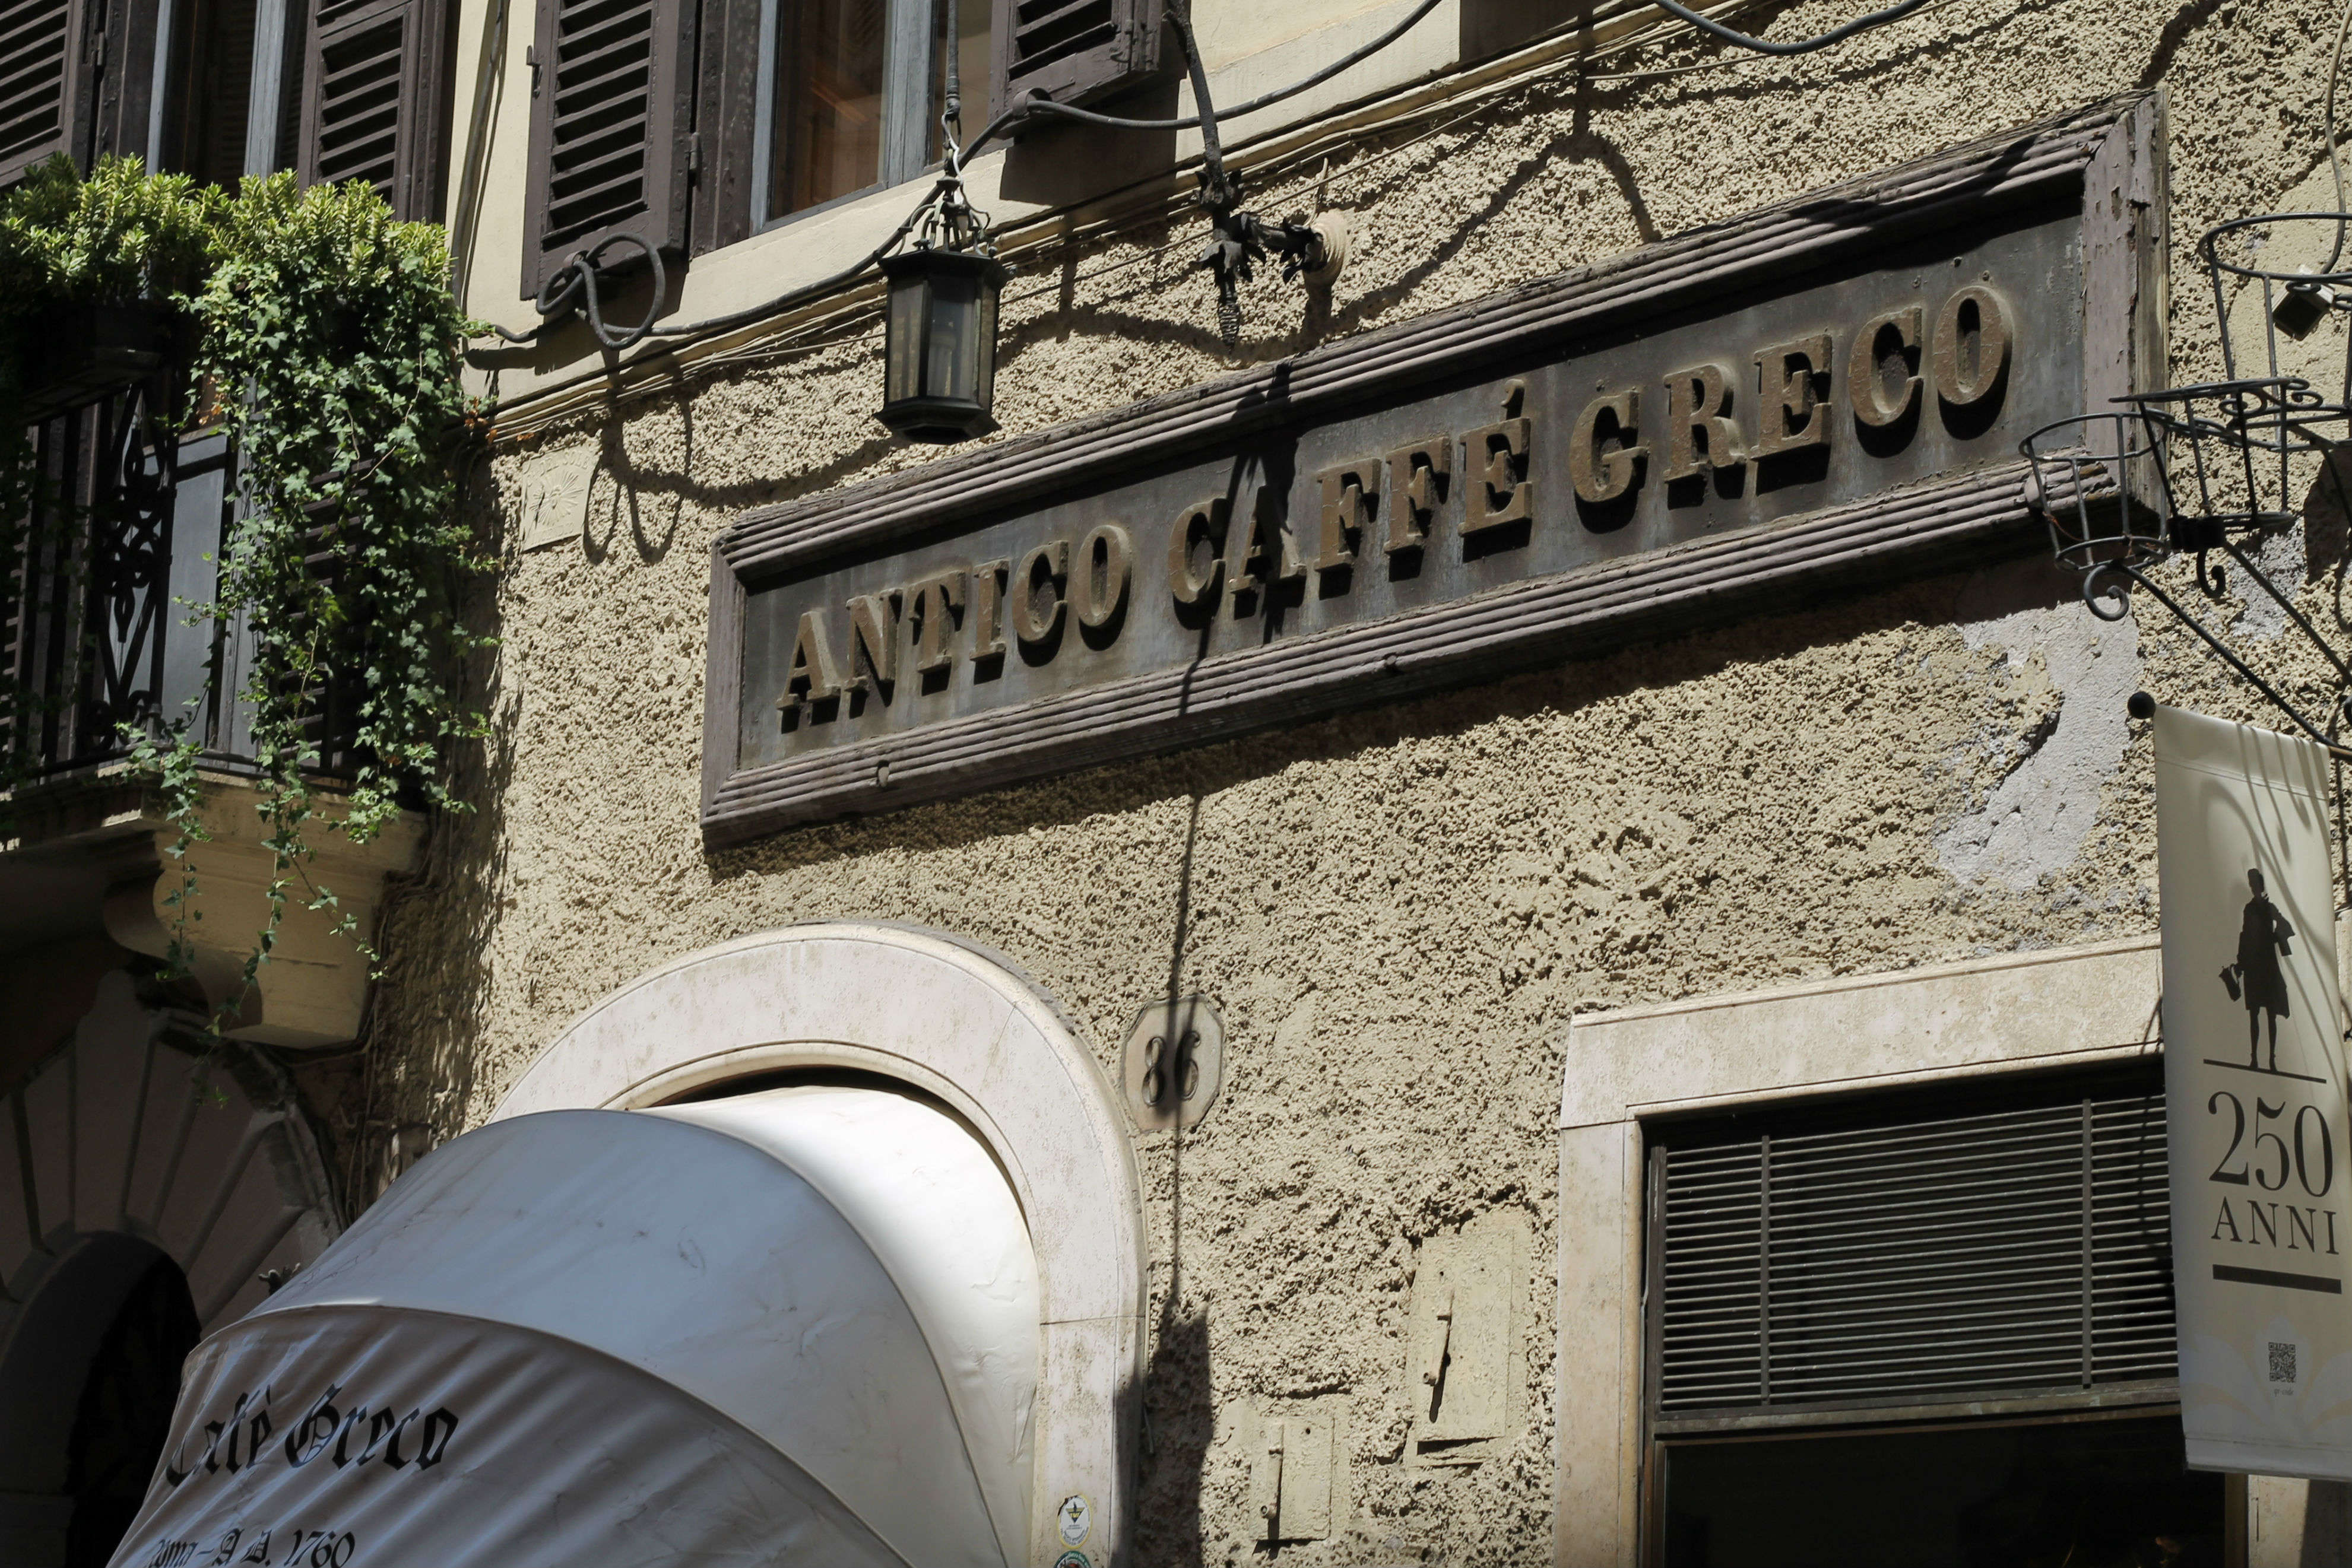 Caffe Greco—Rome’s oldest cafe could shut its doors in the near future